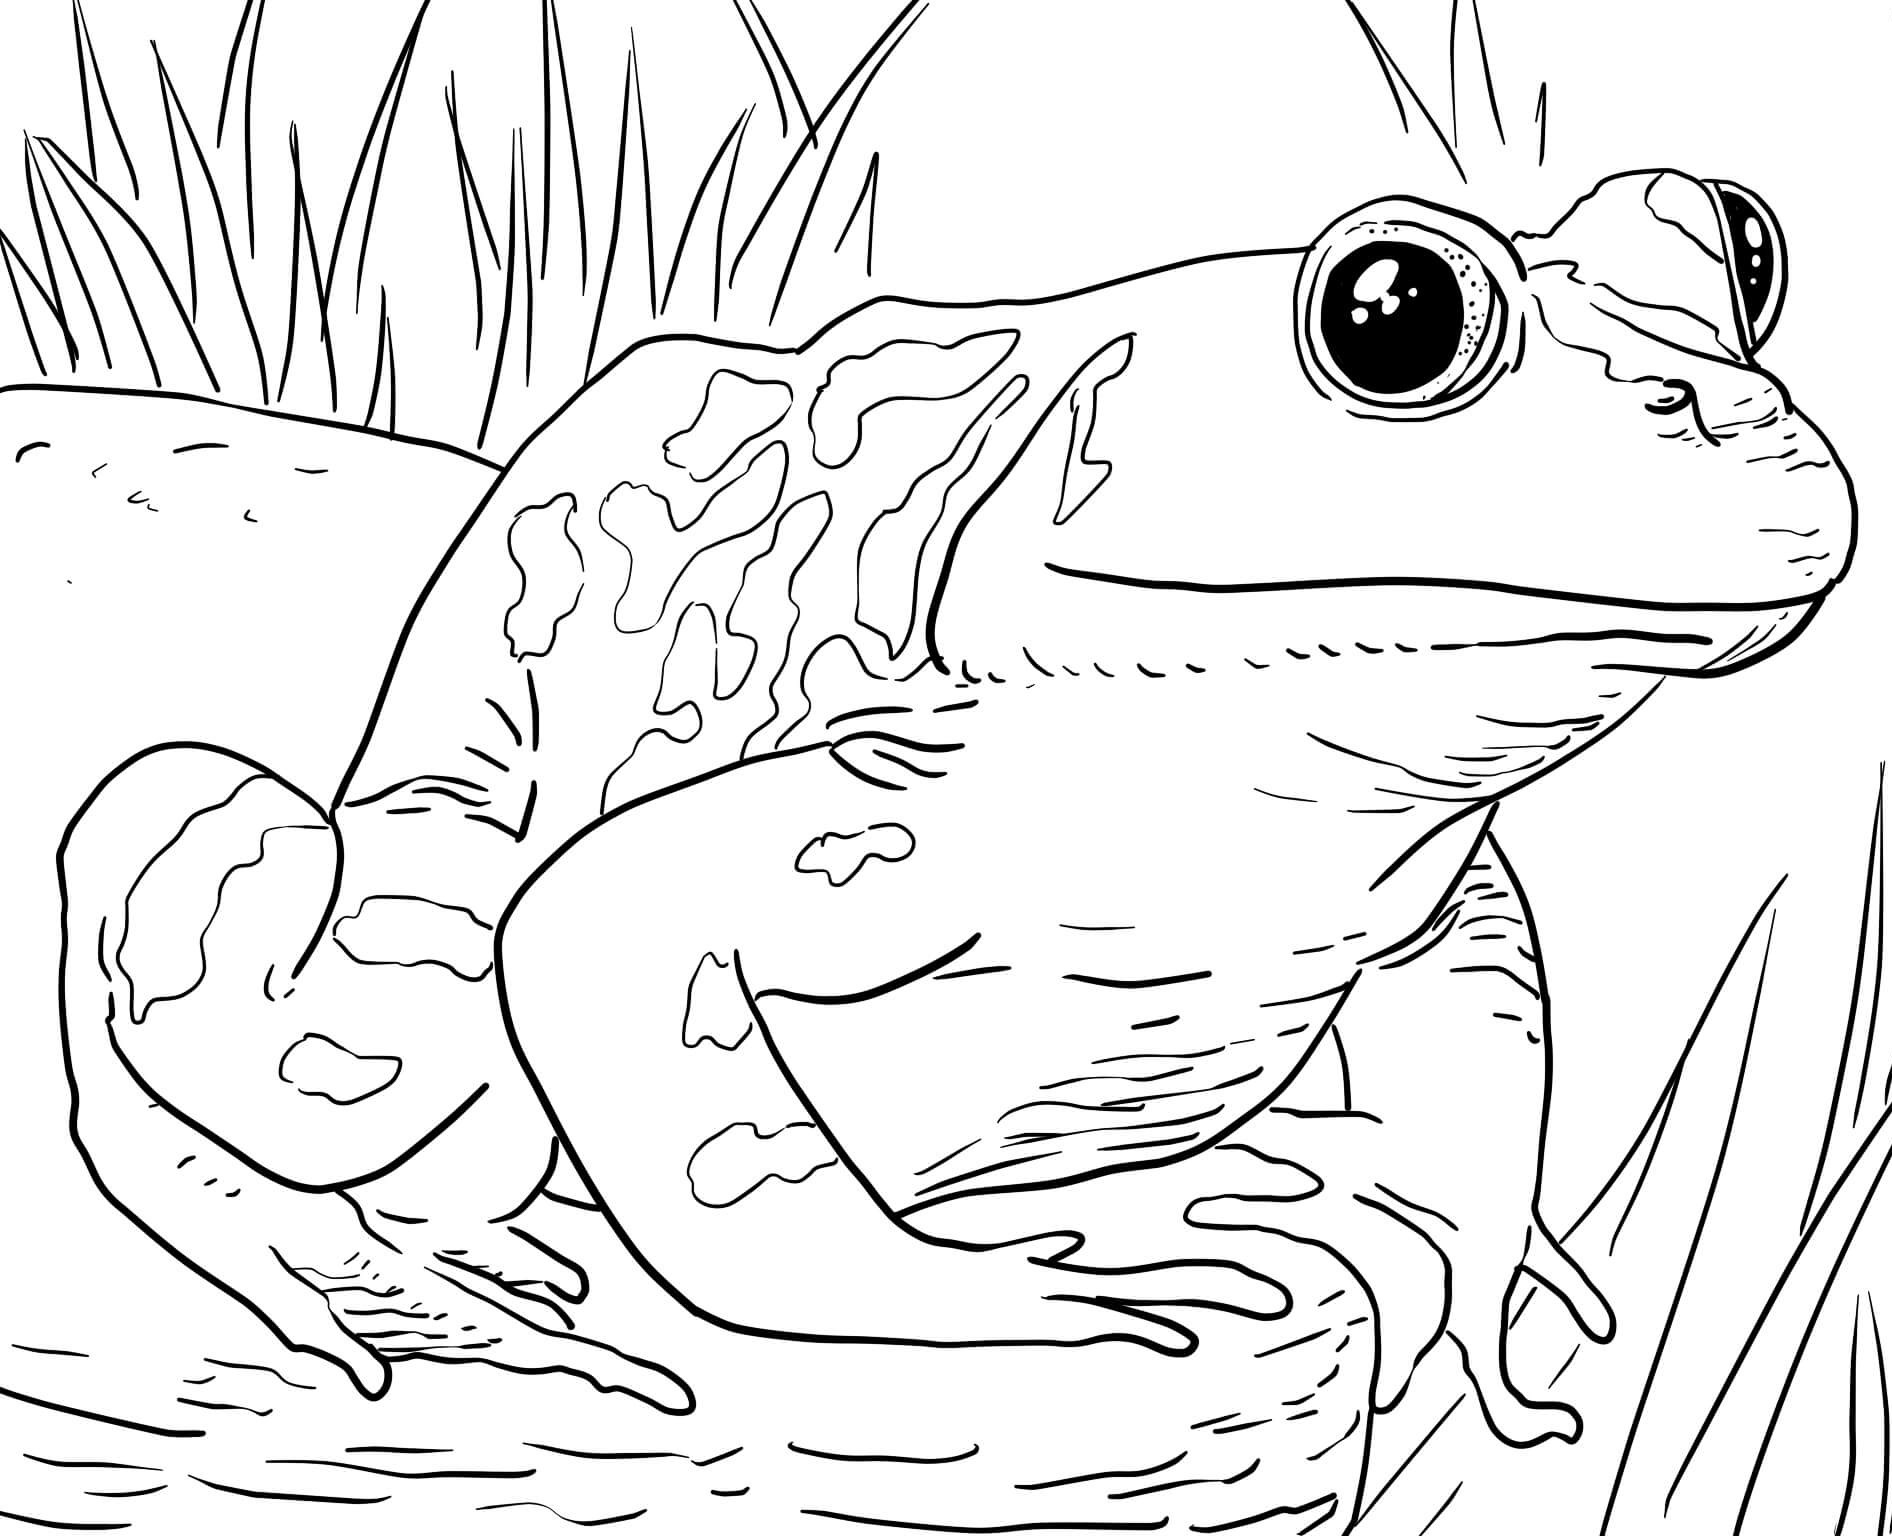 Animal Coloring Pages For Kids
 Zoo Animals Coloring Pages Best Coloring Pages For Kids